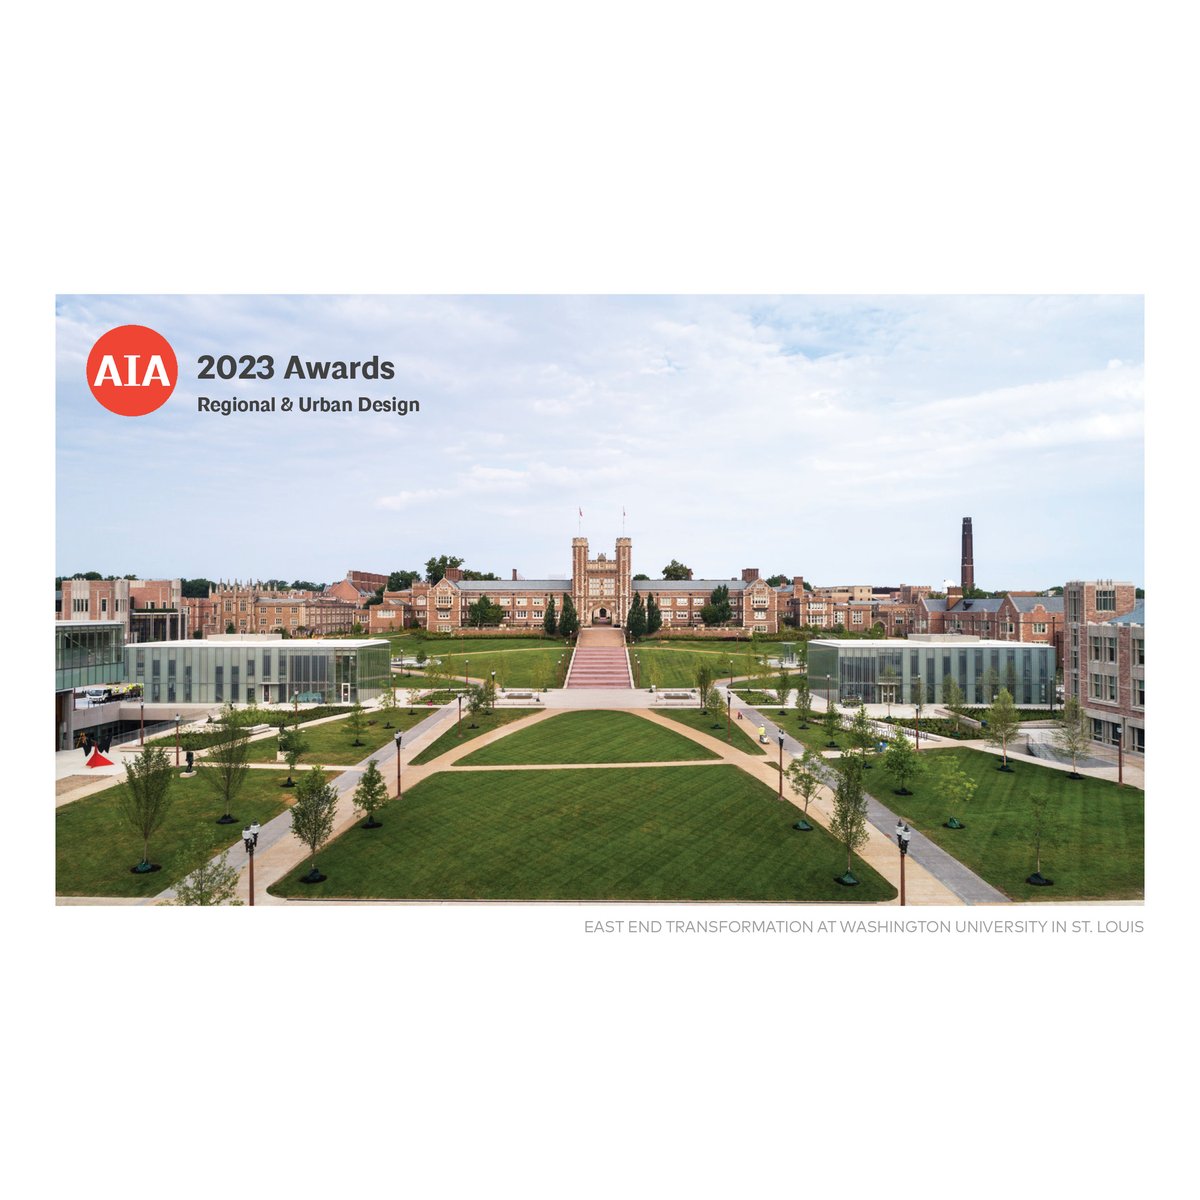 We are excited to share that the East End Transformation at @WUSTL has been honored with the 2023 AIA Regional & Urban Design Award, one of the most significant urban planning awards presented by @AIANational Read the full story here: bit.ly/3mvnlxu @KIERANTMBERLK